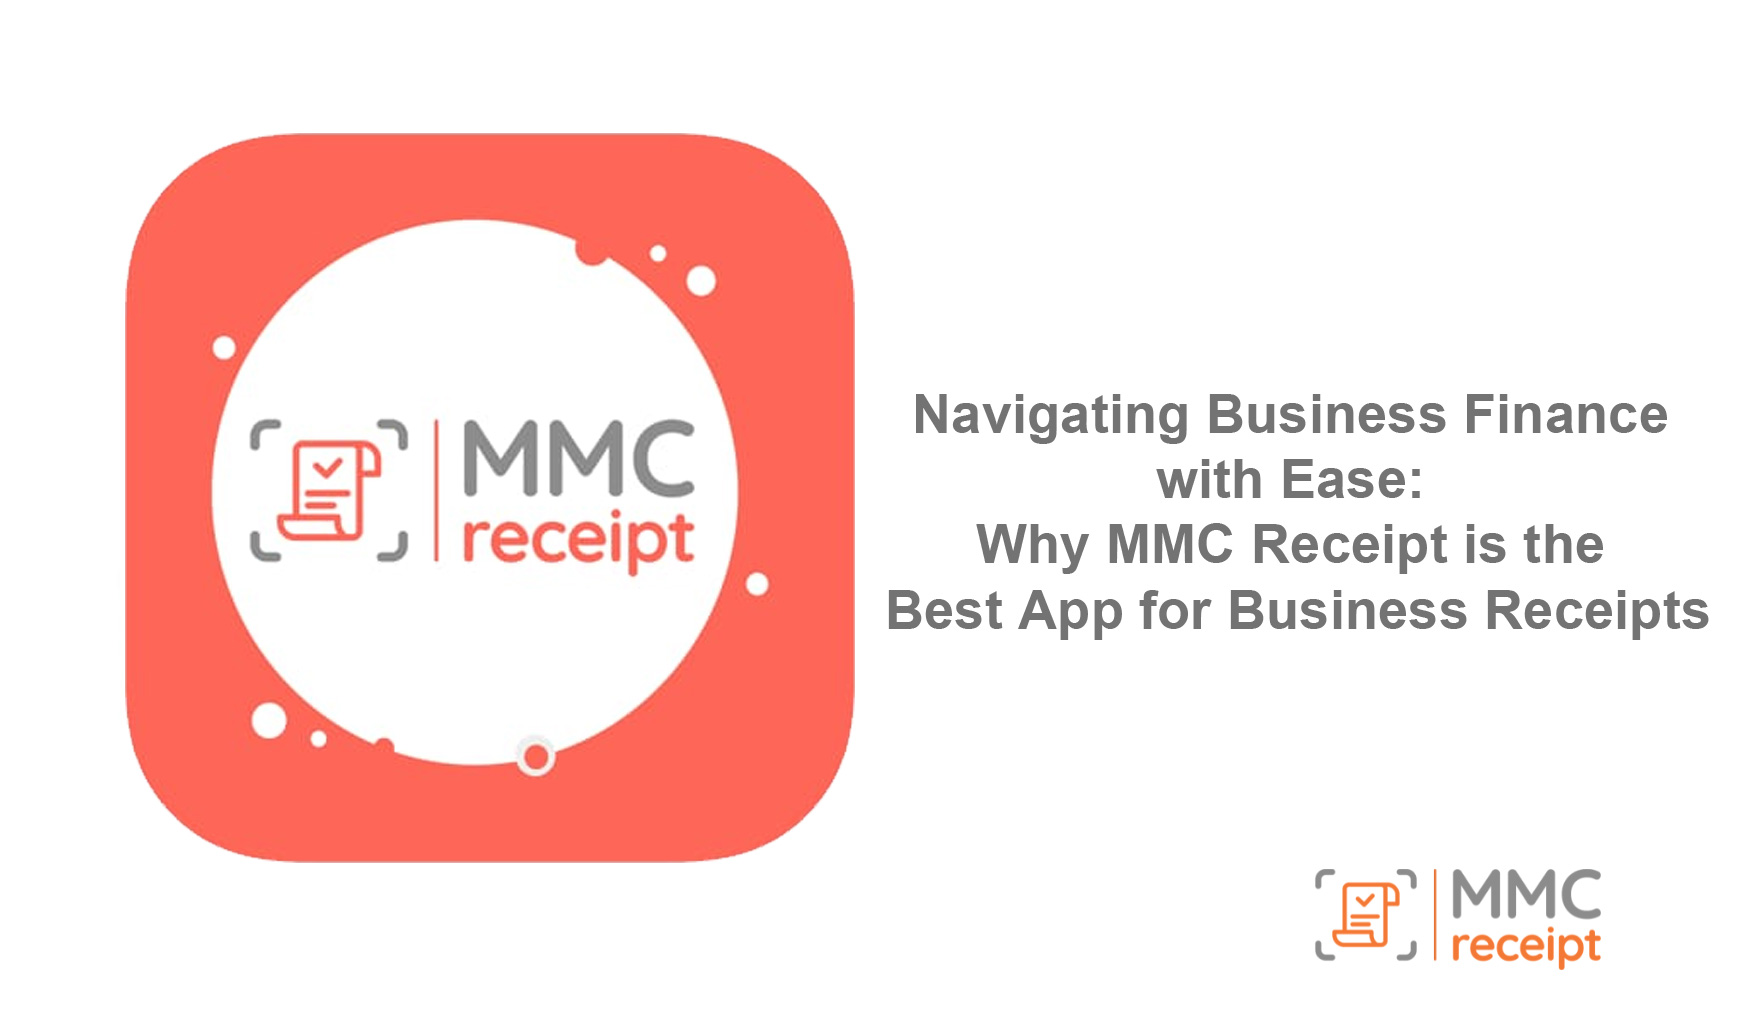 Navigating Business Finance with Ease: Why MMC Receipt is the Best App for Business Receipts